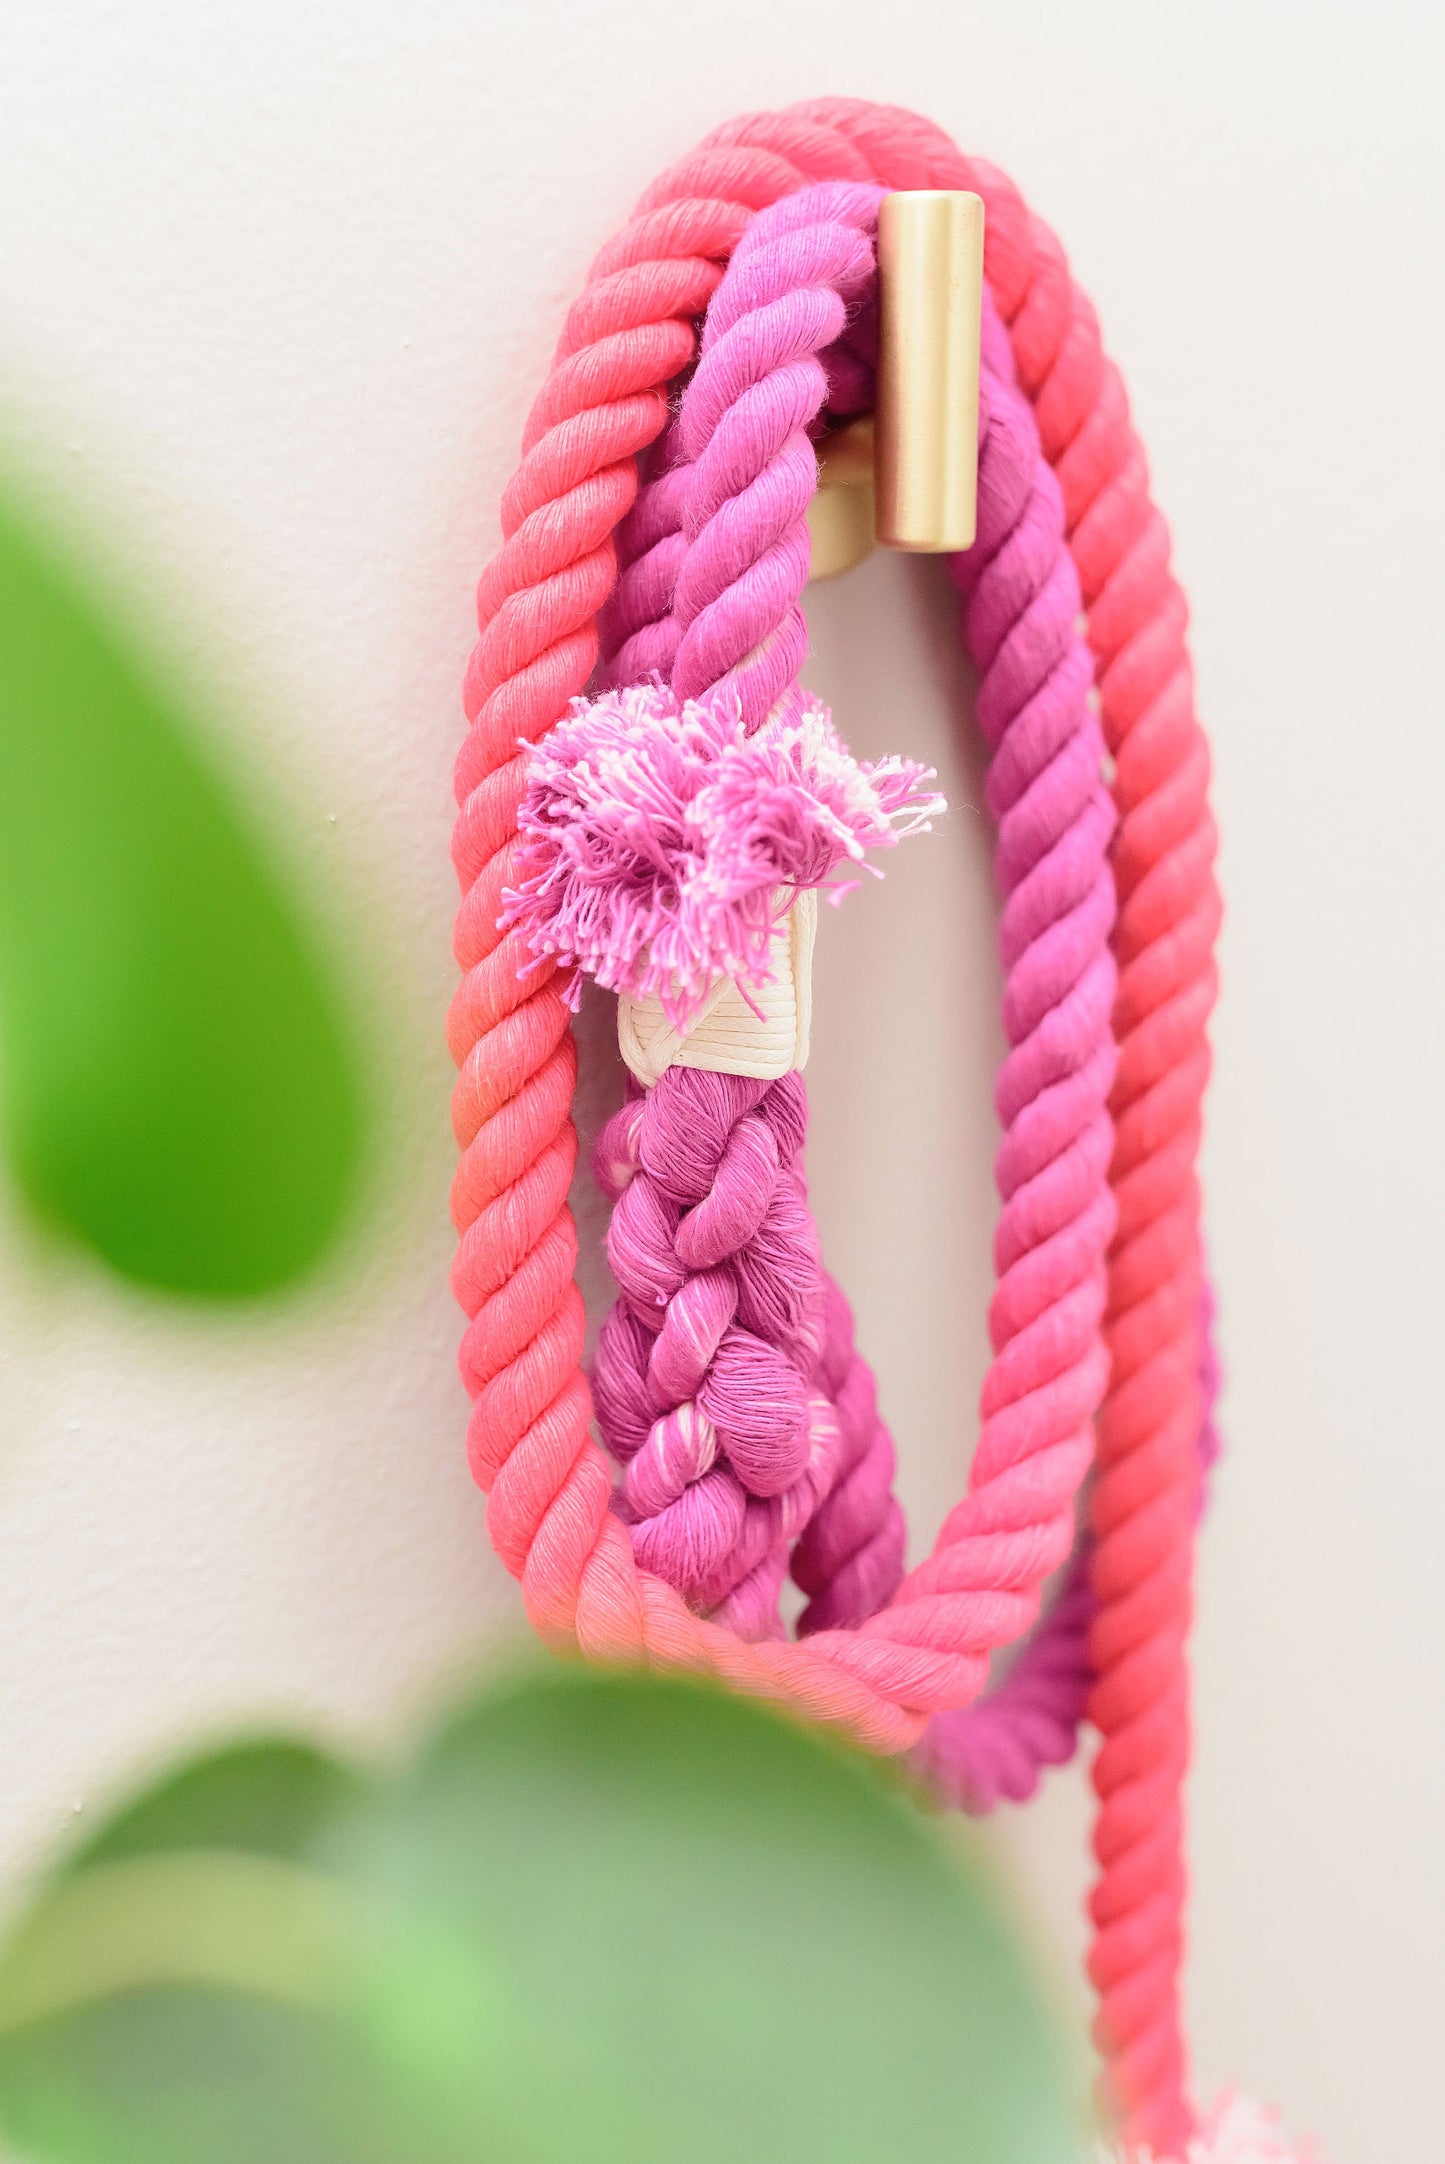 Ombré Purple and Coral Cotton Rope Leash - Dog Gift - Gift for Her - Pet Birthday Gift - Dog Accessory - Dog Lover Gift - Wedding Leash 